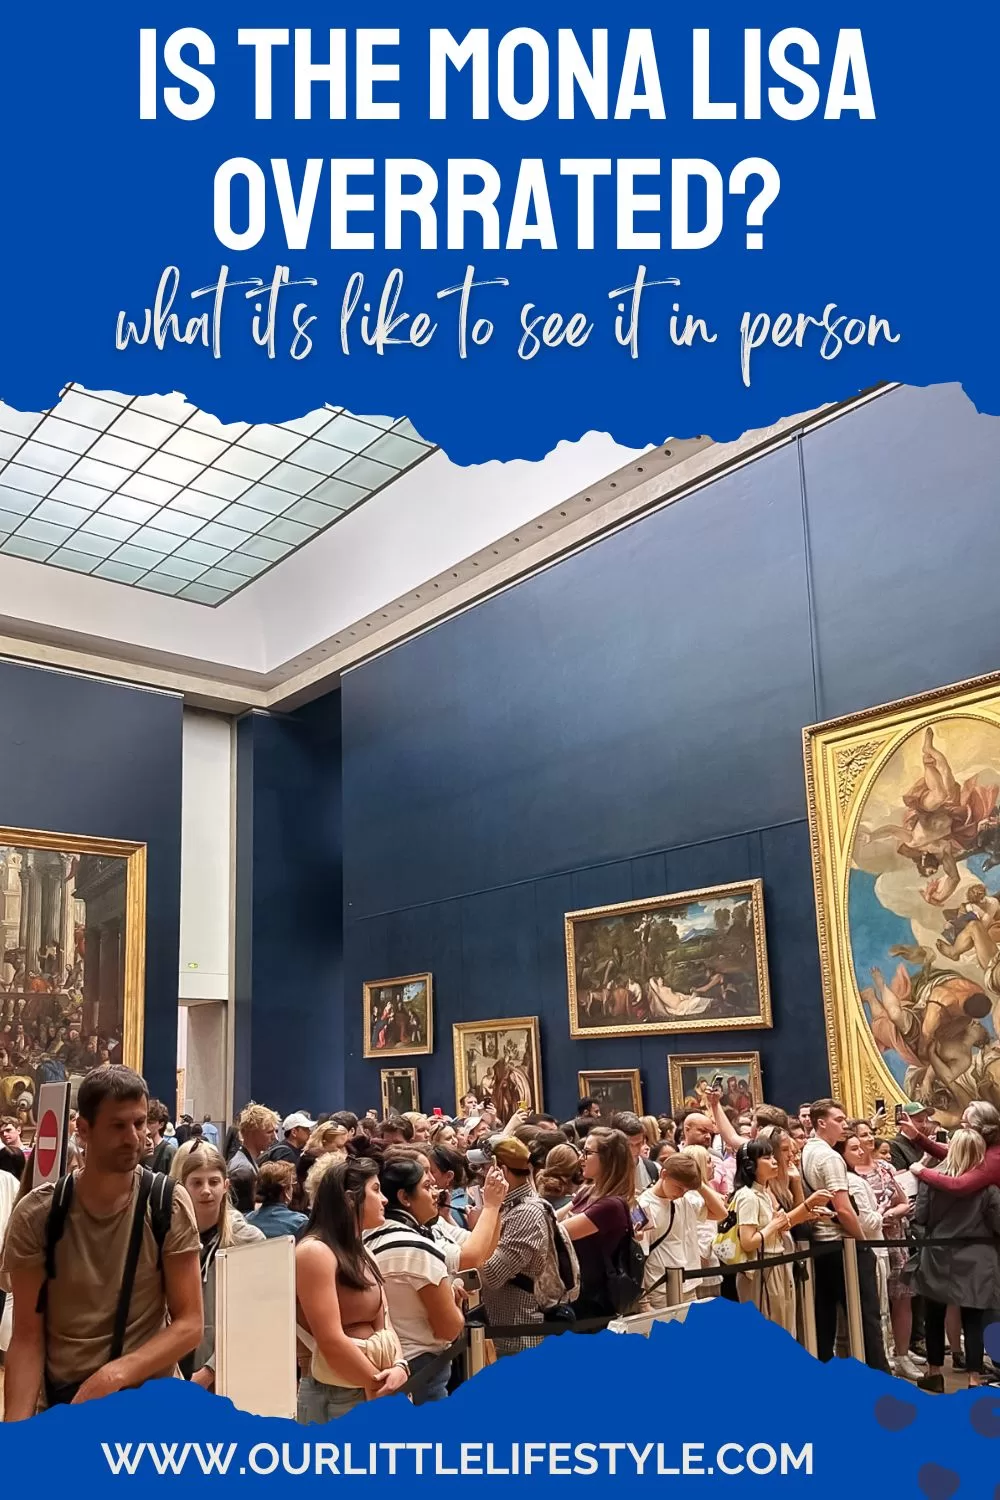 Crowds of people lined up to view the Mona Lisa